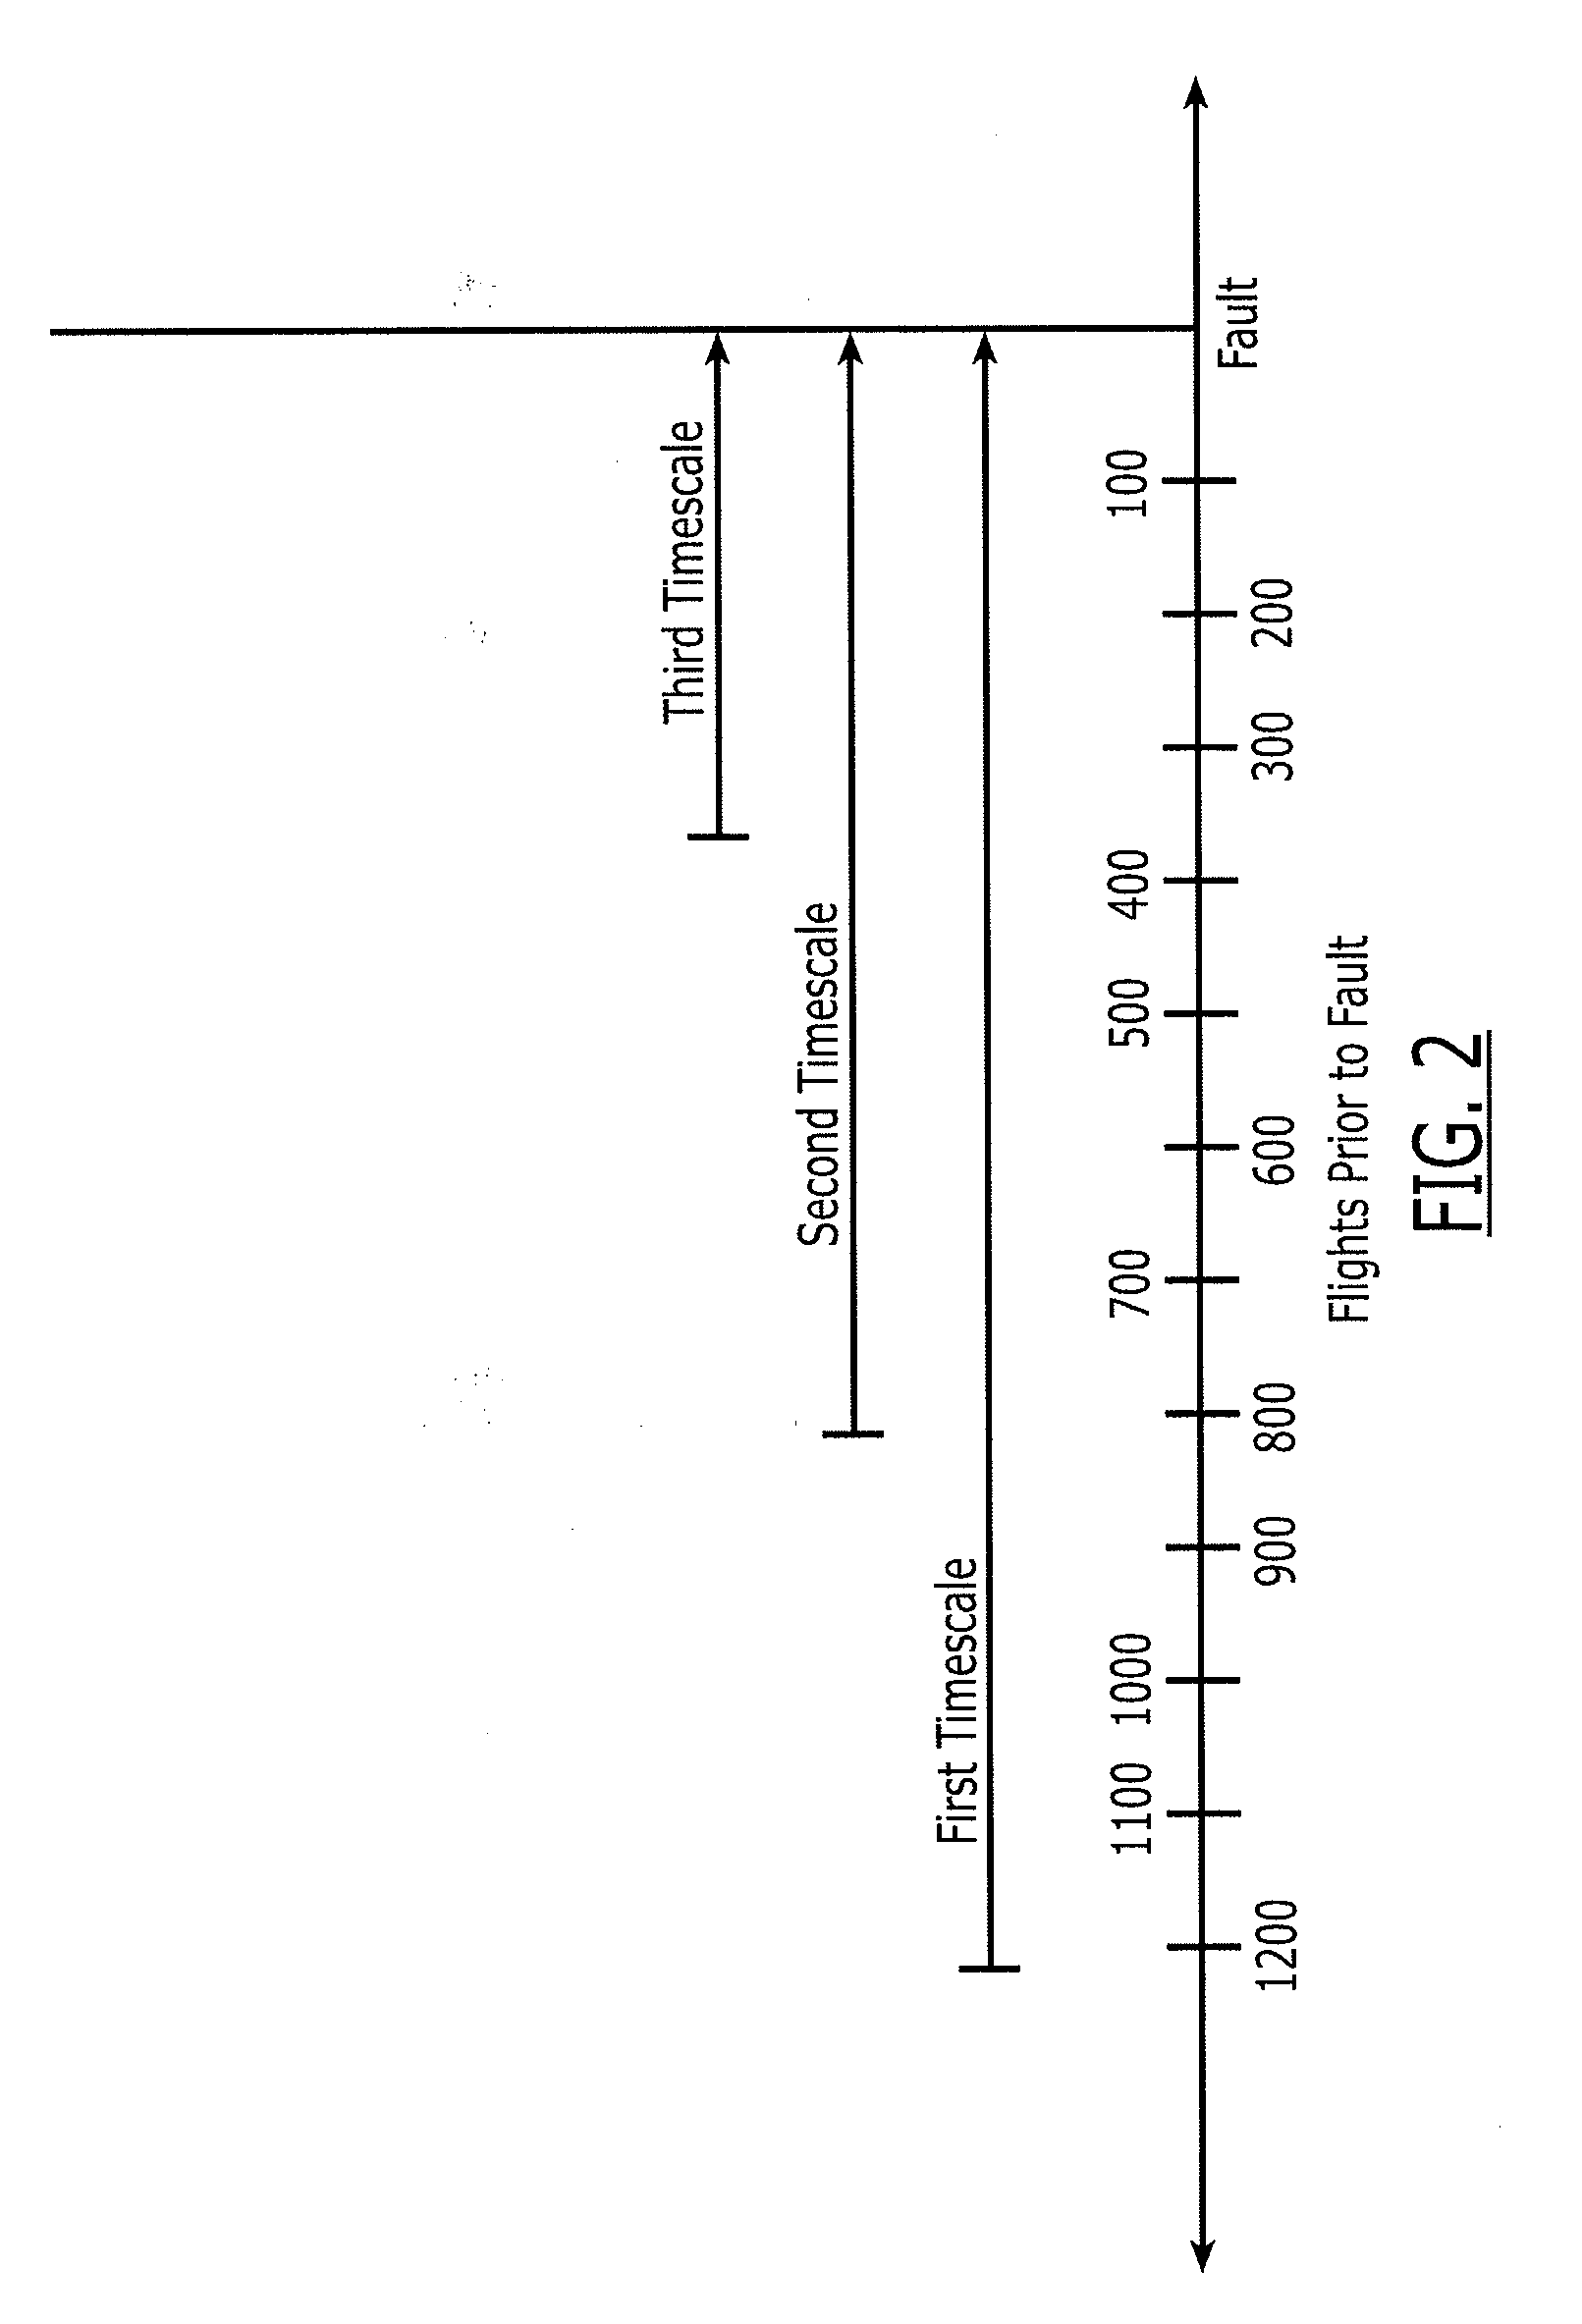 Method, Apparatus And Computer Program Product For Predicting A Fault Utilizing Multi-Resolution Classifier Fusion